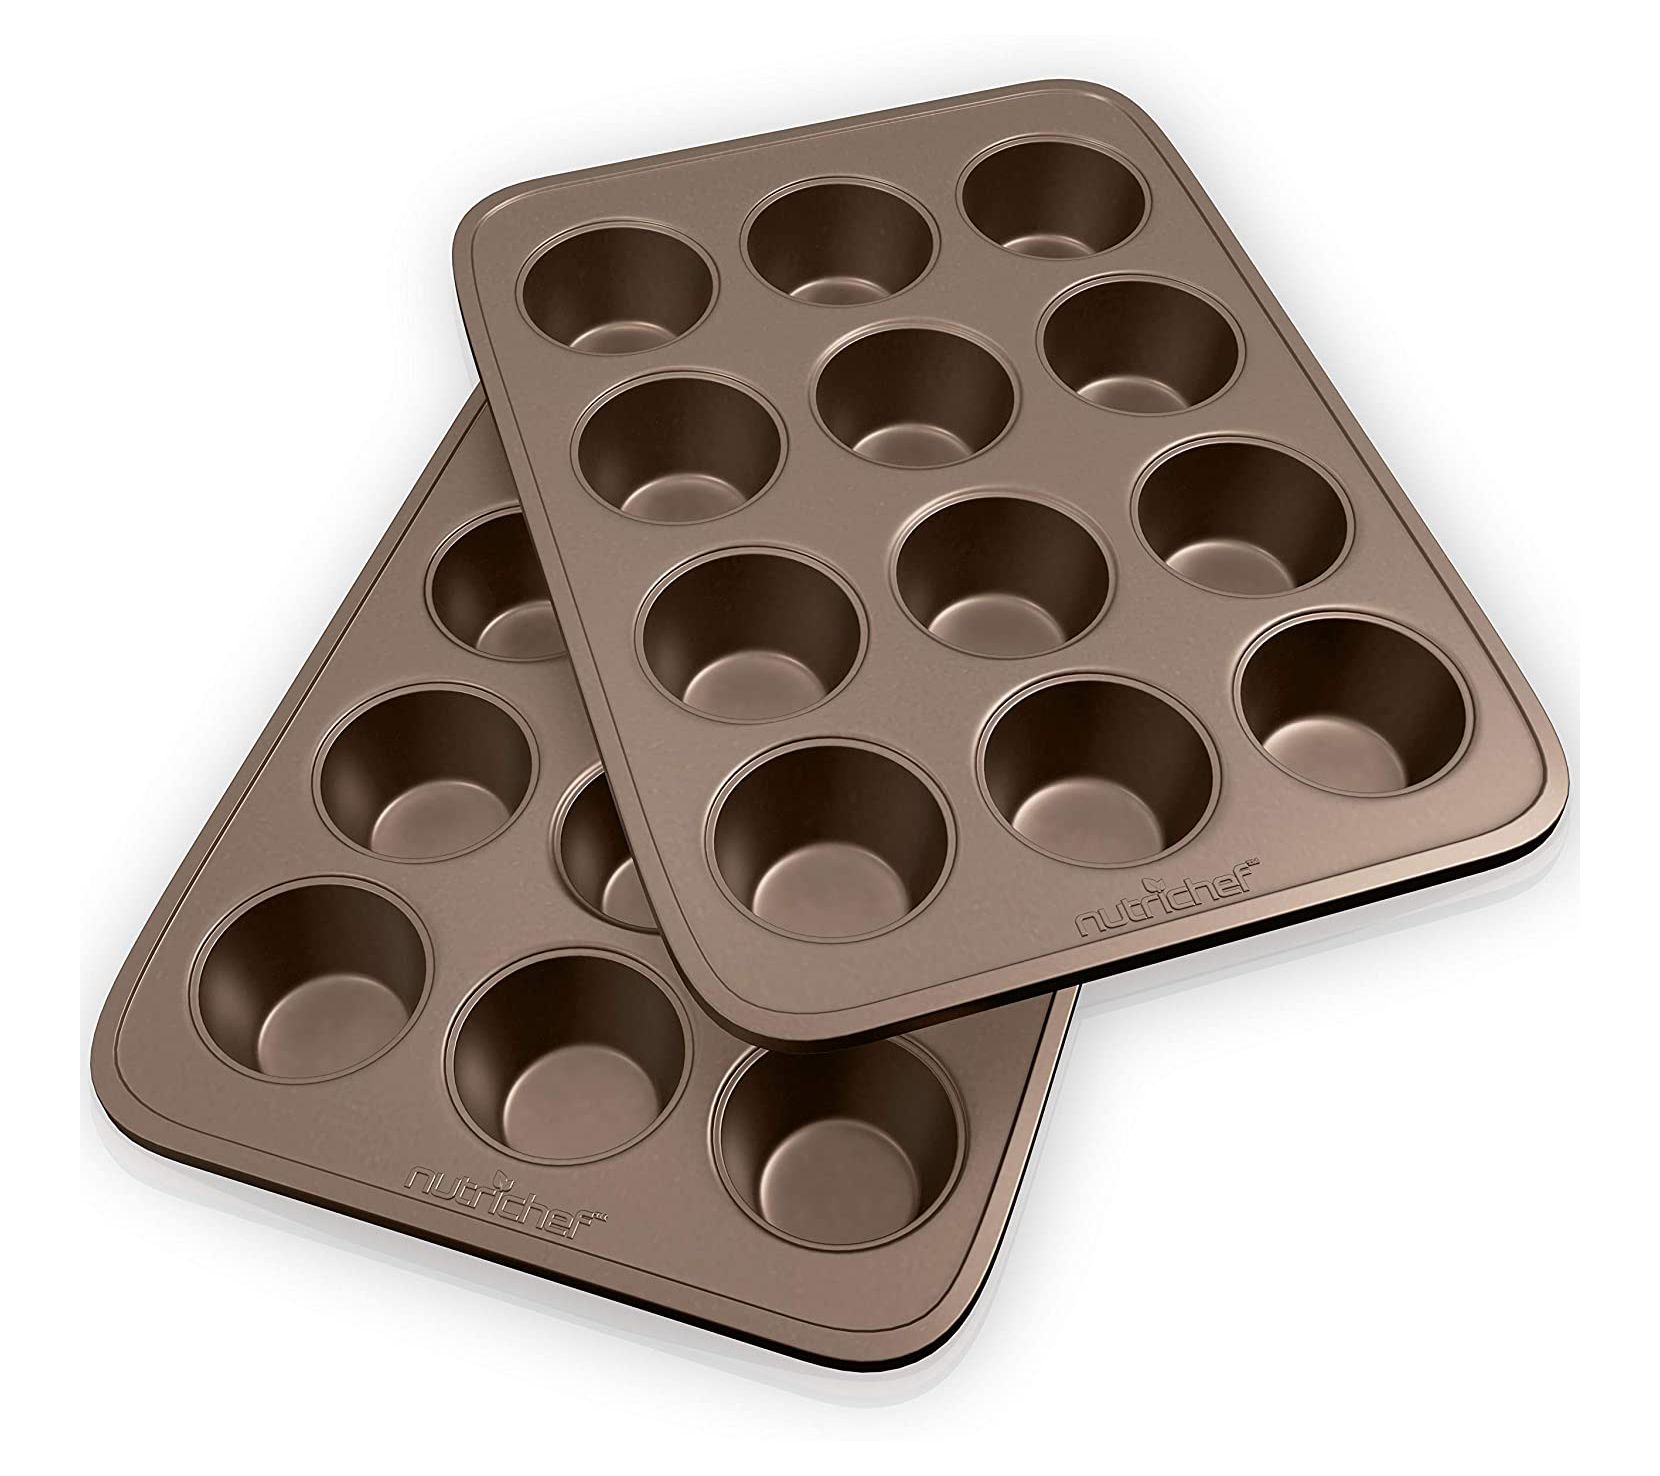 NutriChef Non-Stick Oven Pan Baking Sheets, Gold